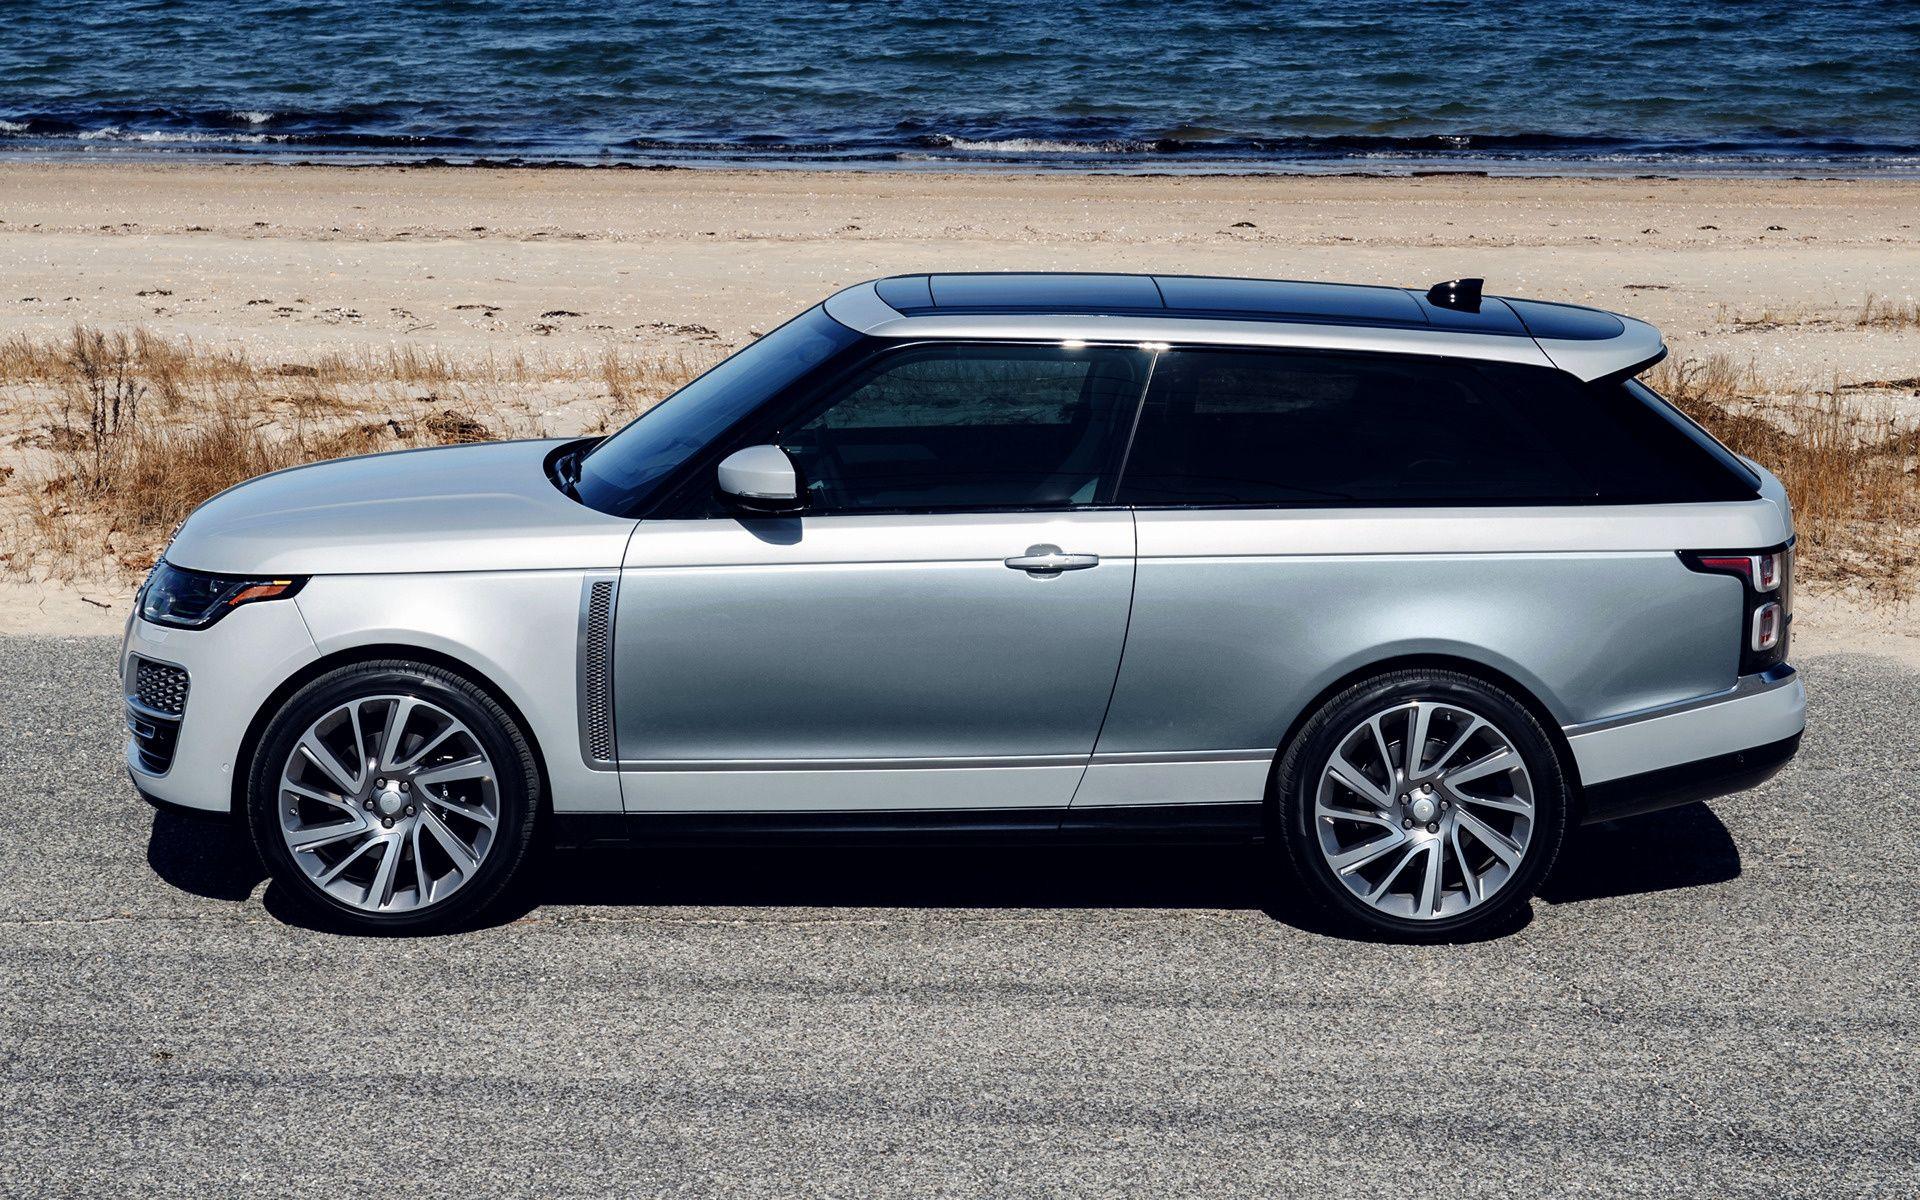 Range Rover SV Coupe (2019) US Wallpaper and HD Image